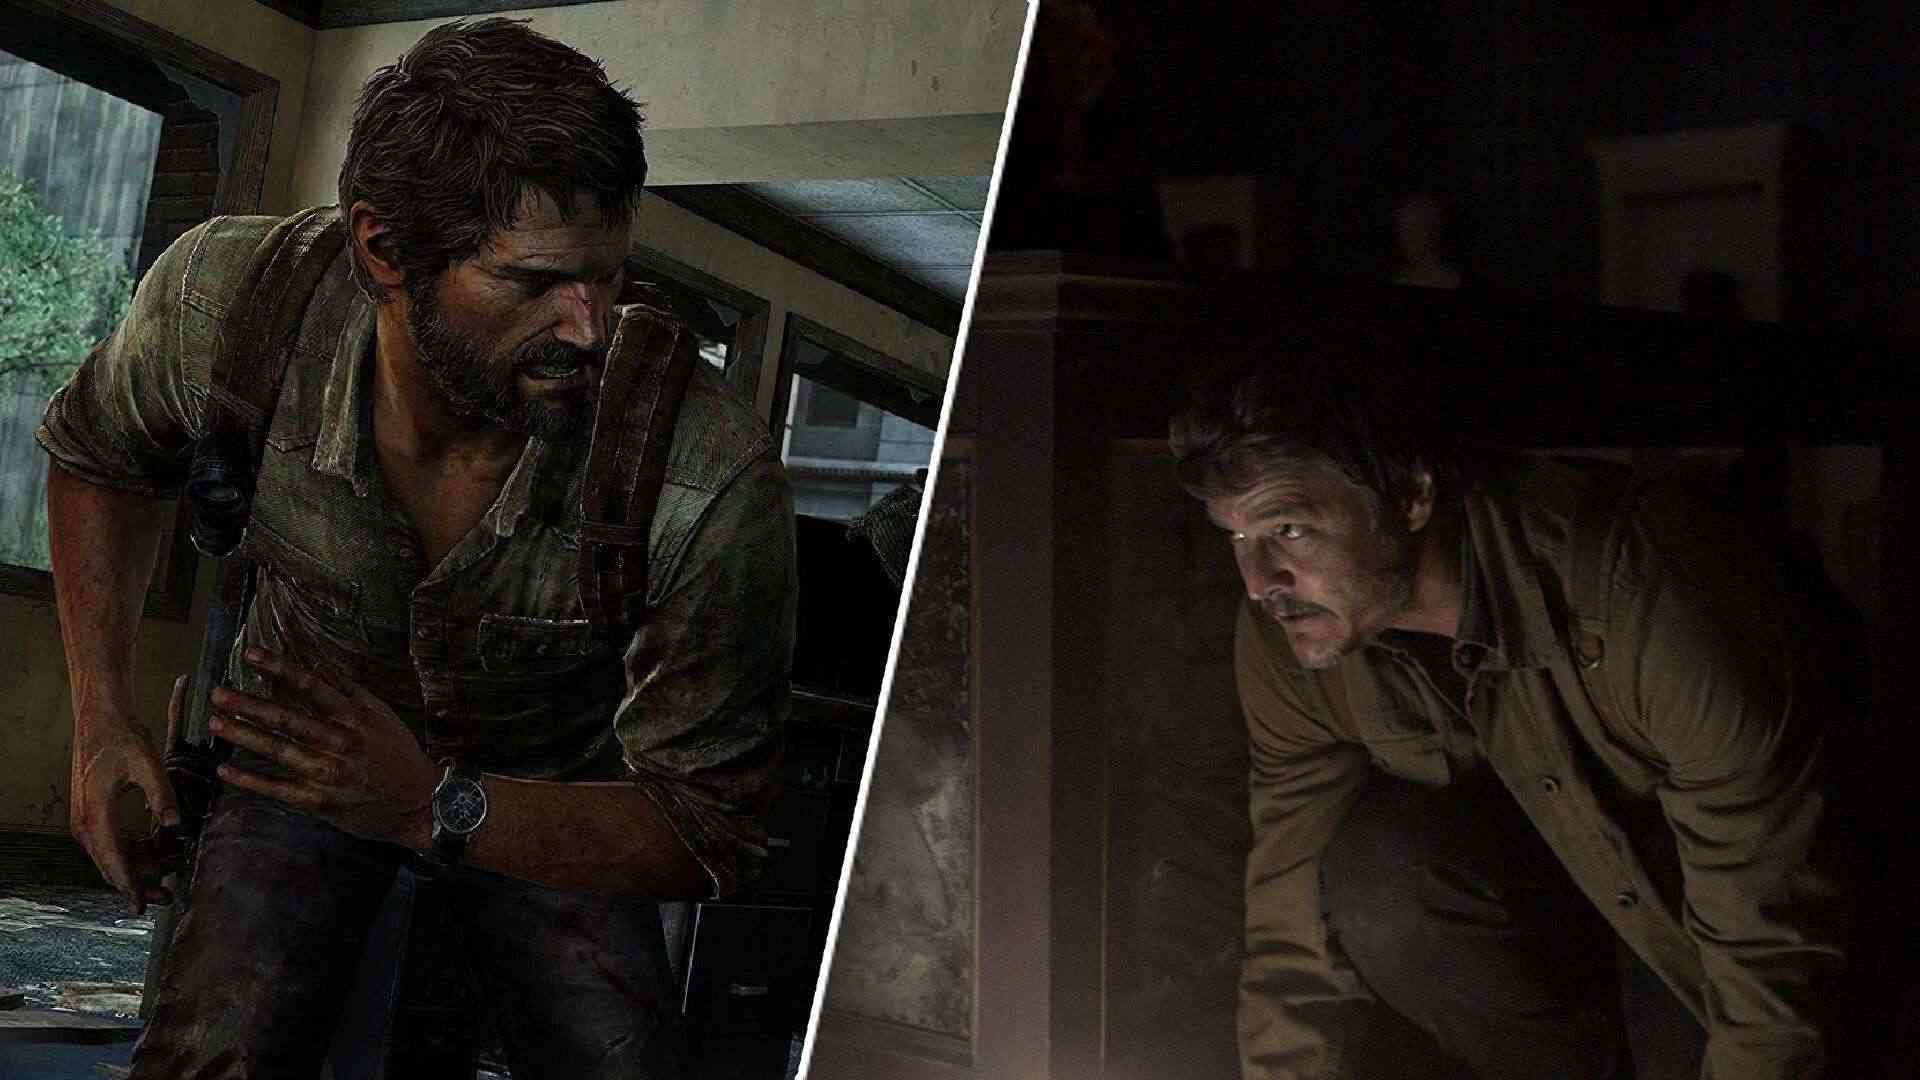 The Last of Us Part I unexpectedly increased sales after the first episode aired on HBO